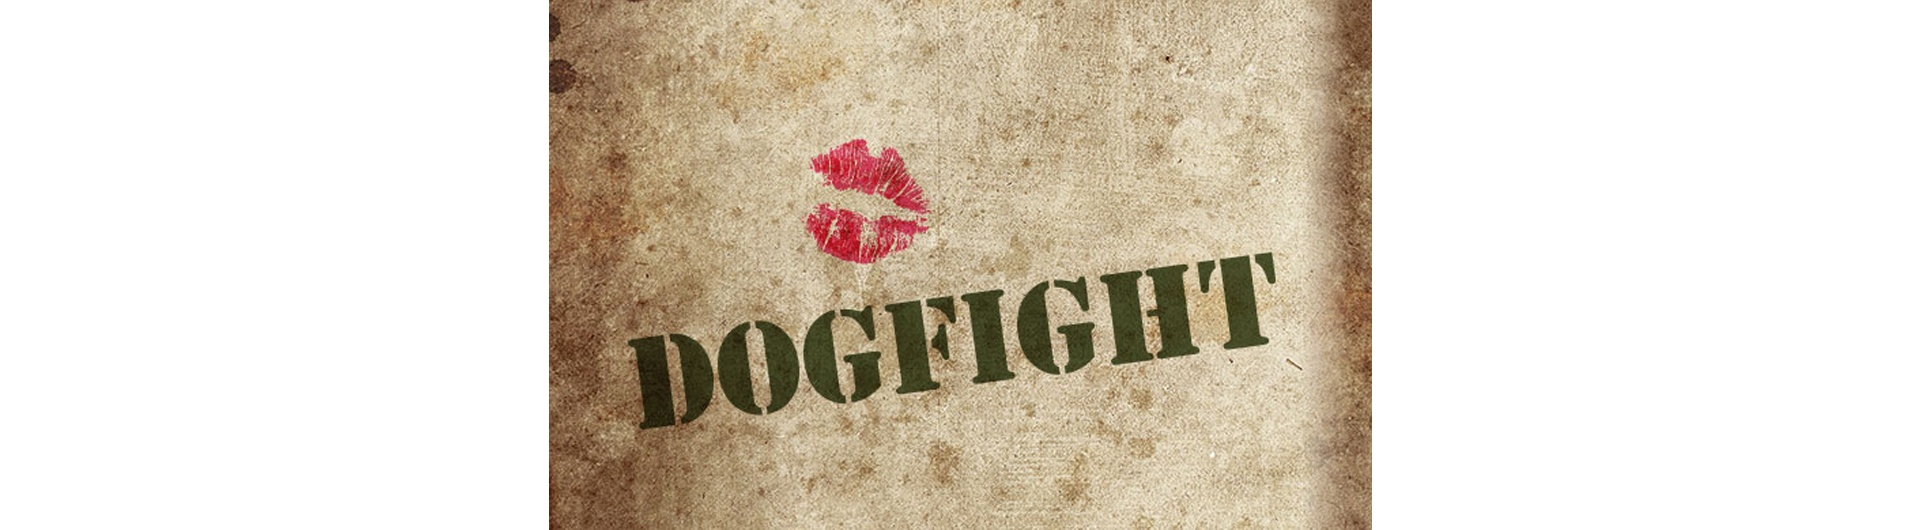 Dogfight title on grungy background with lipstick kiss above